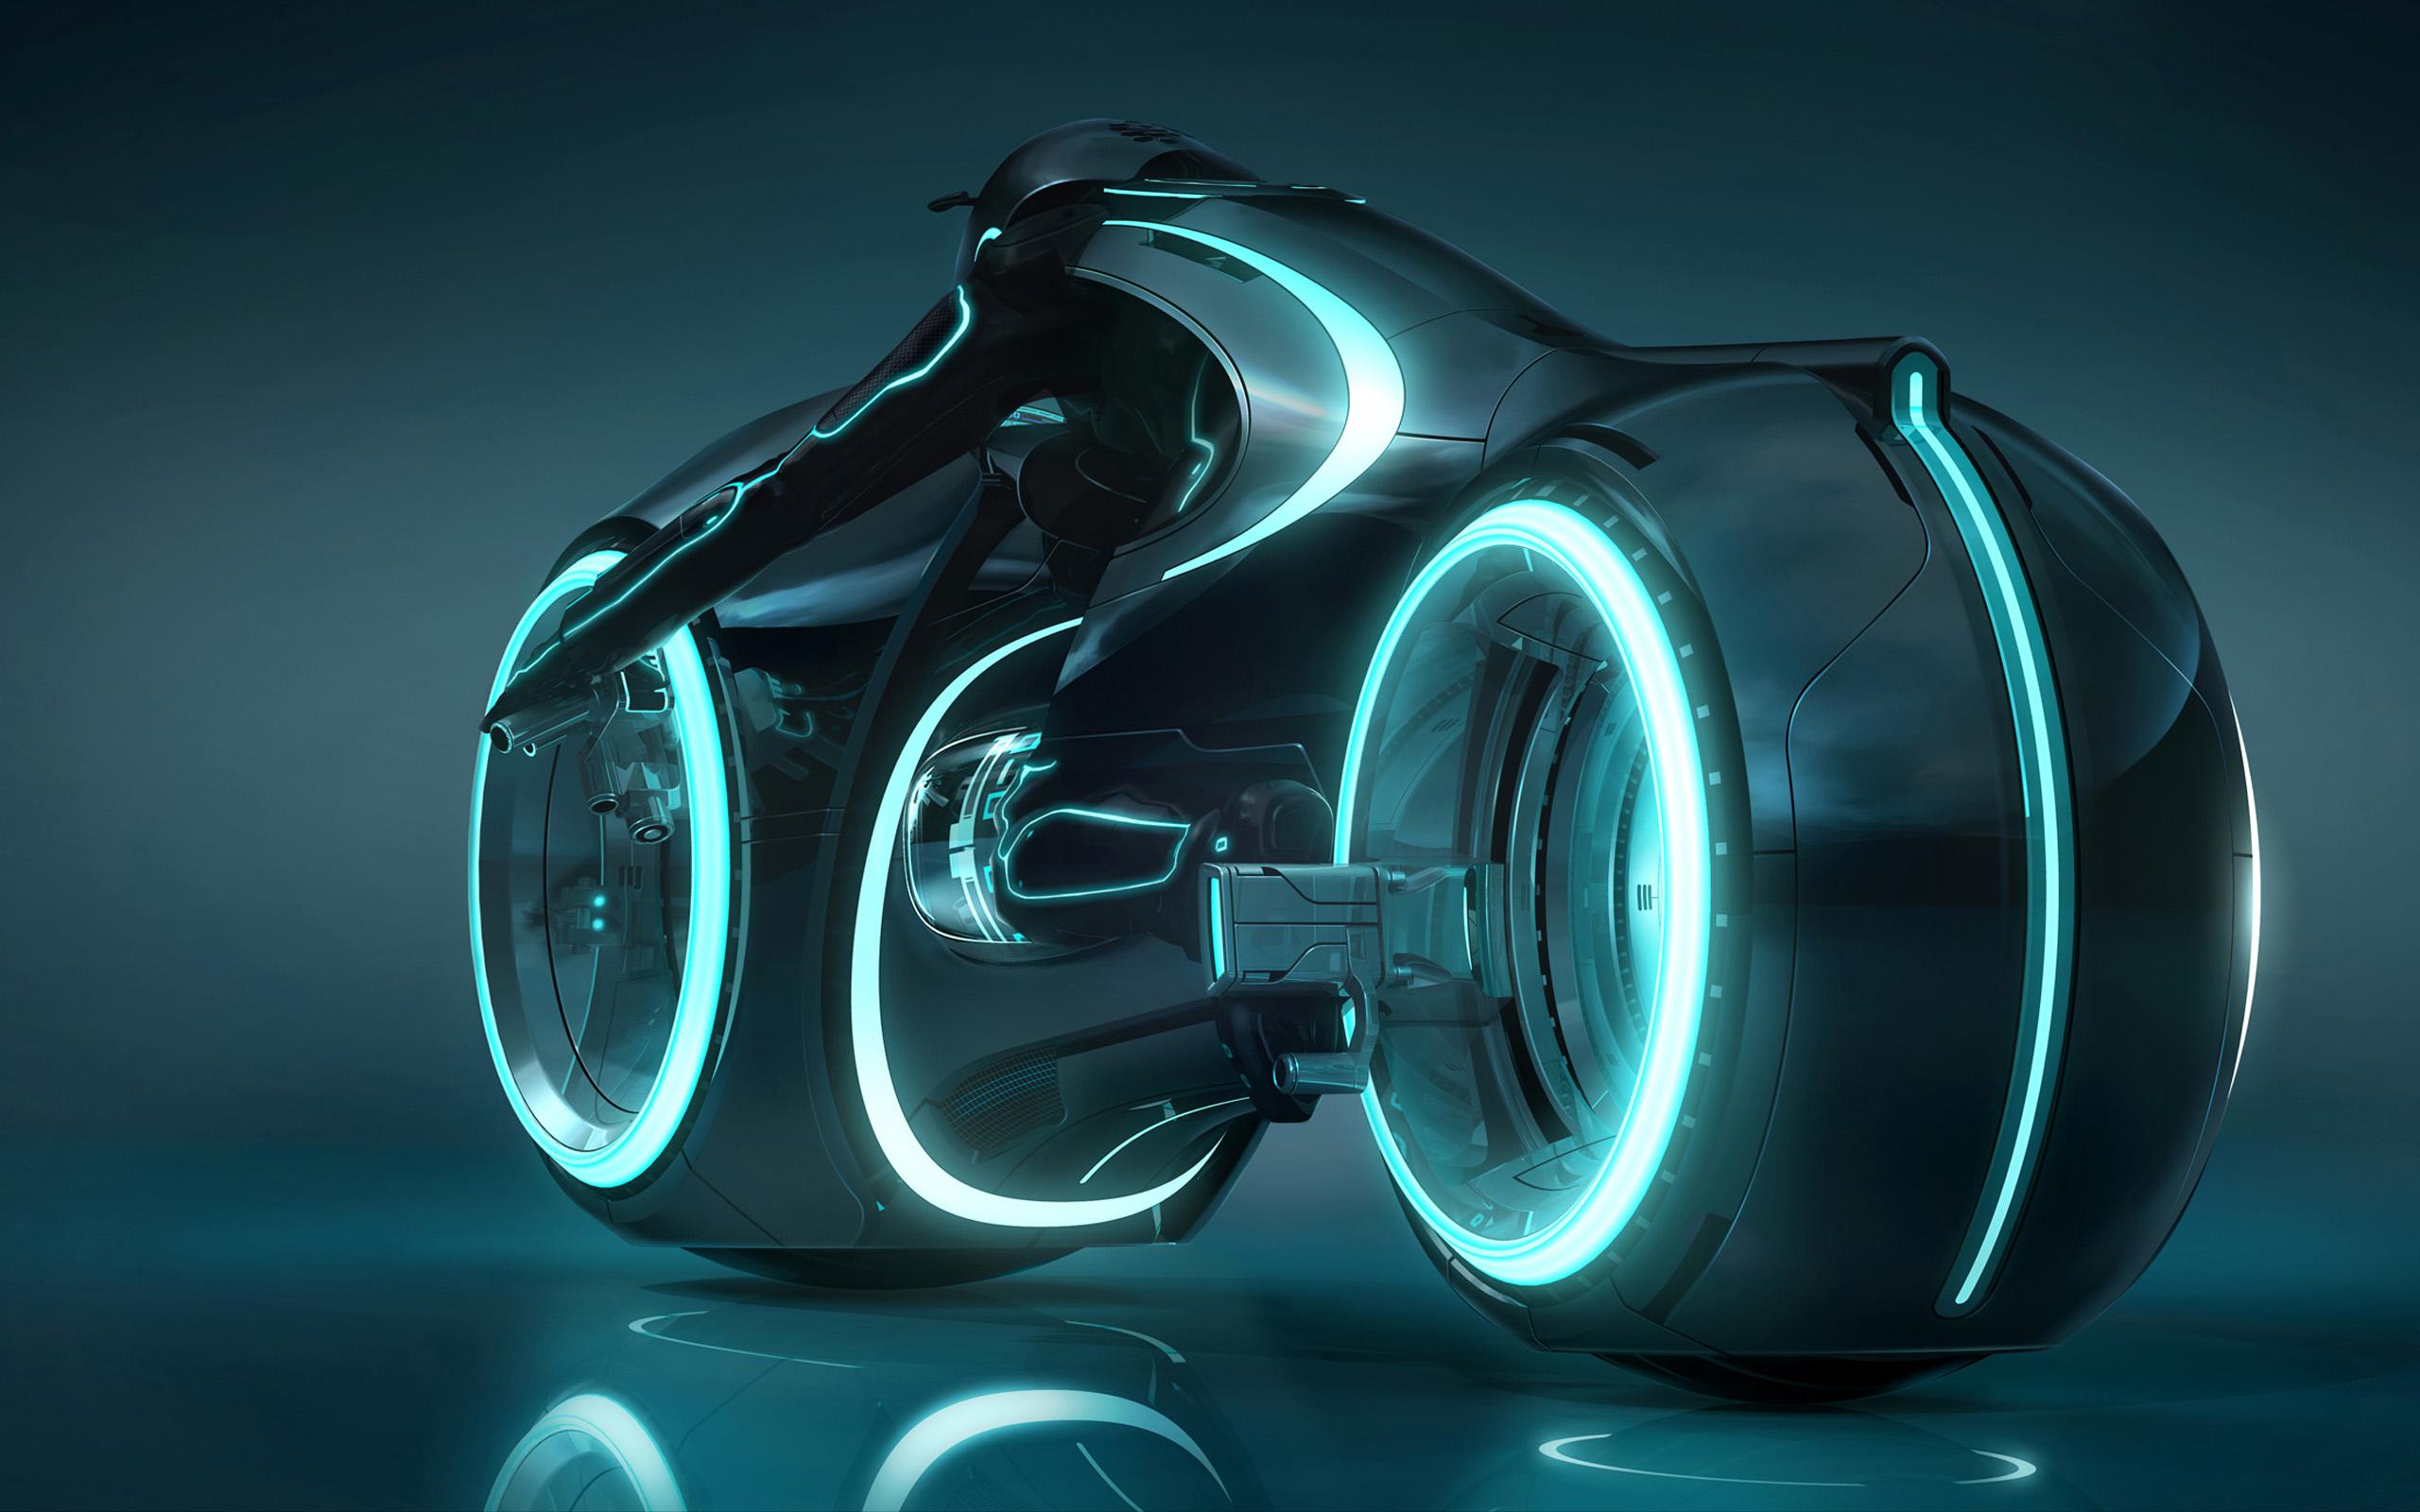 200 TRON Legacy HD Wallpapers and Backgrounds